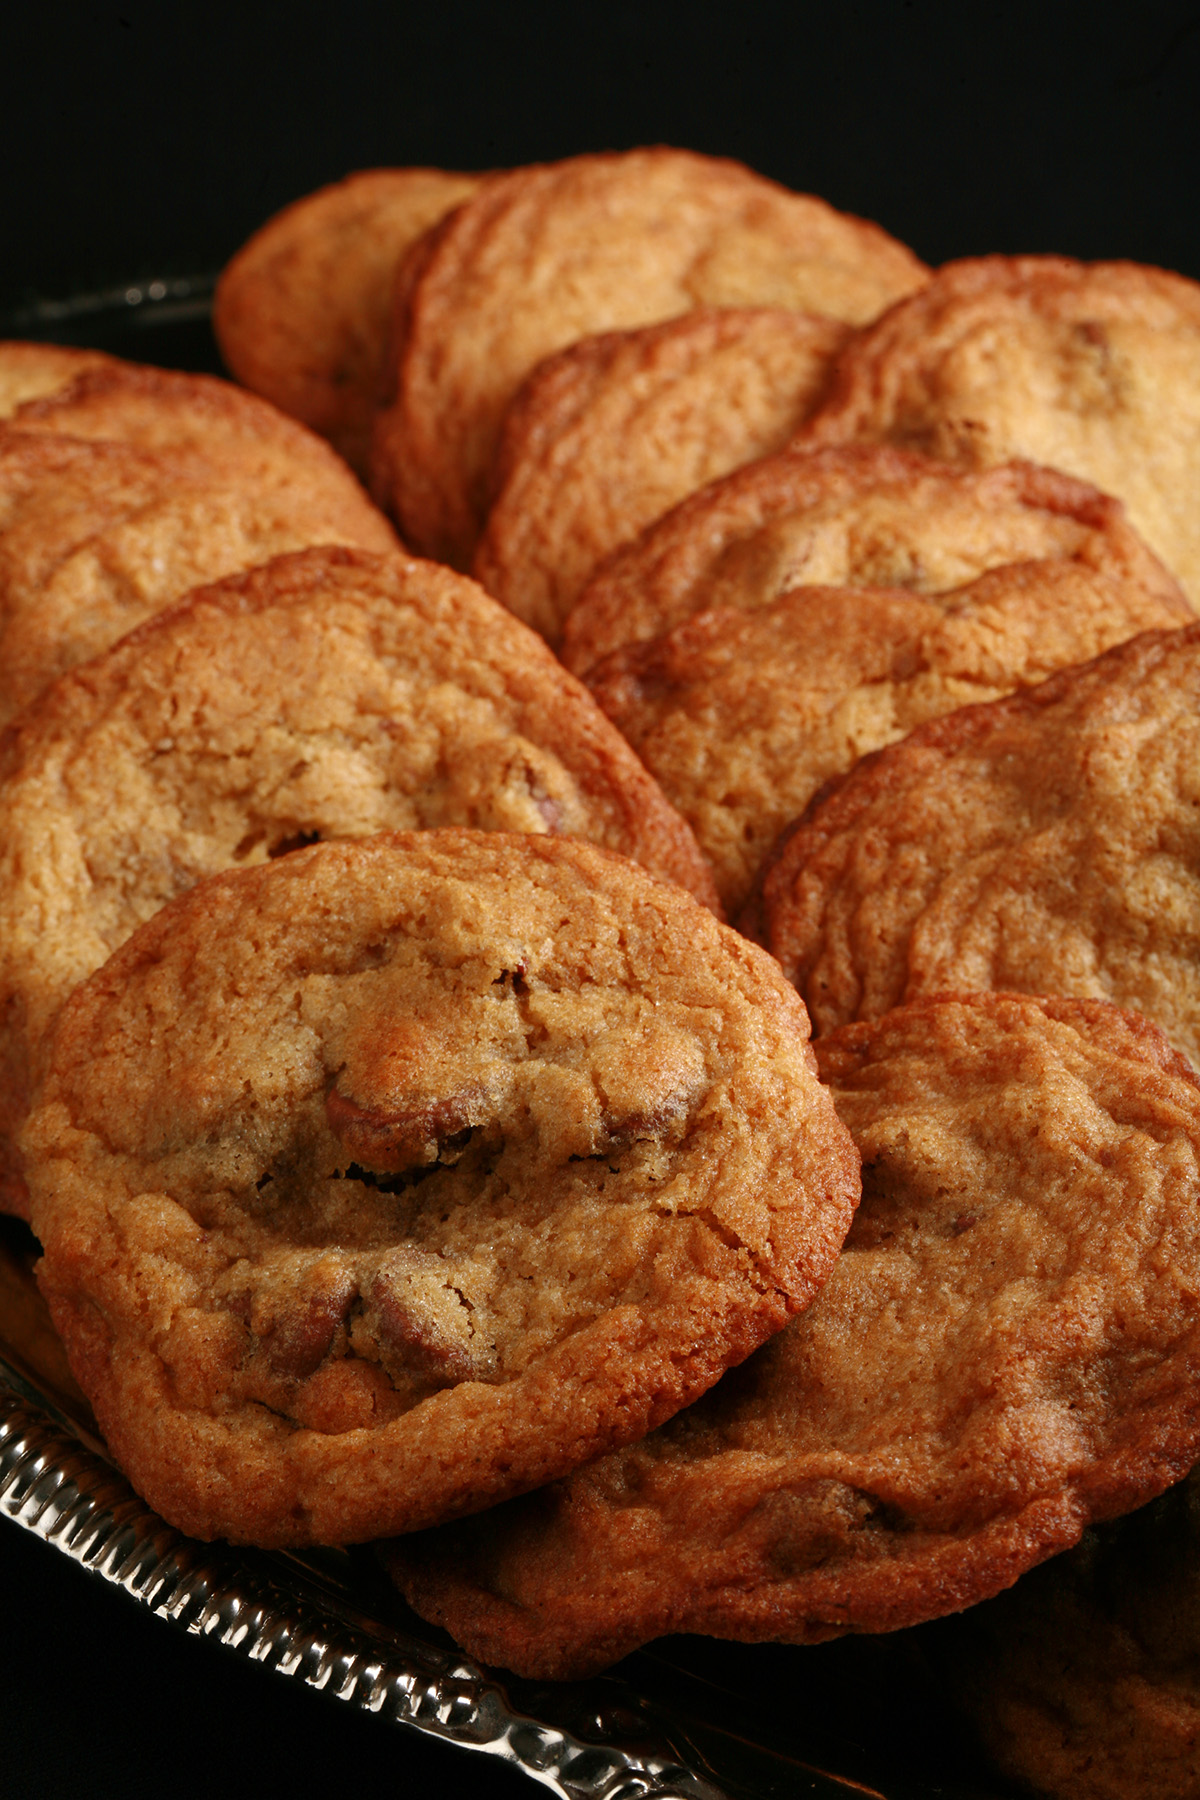 A plate of gluten free chocolate chip cookies.